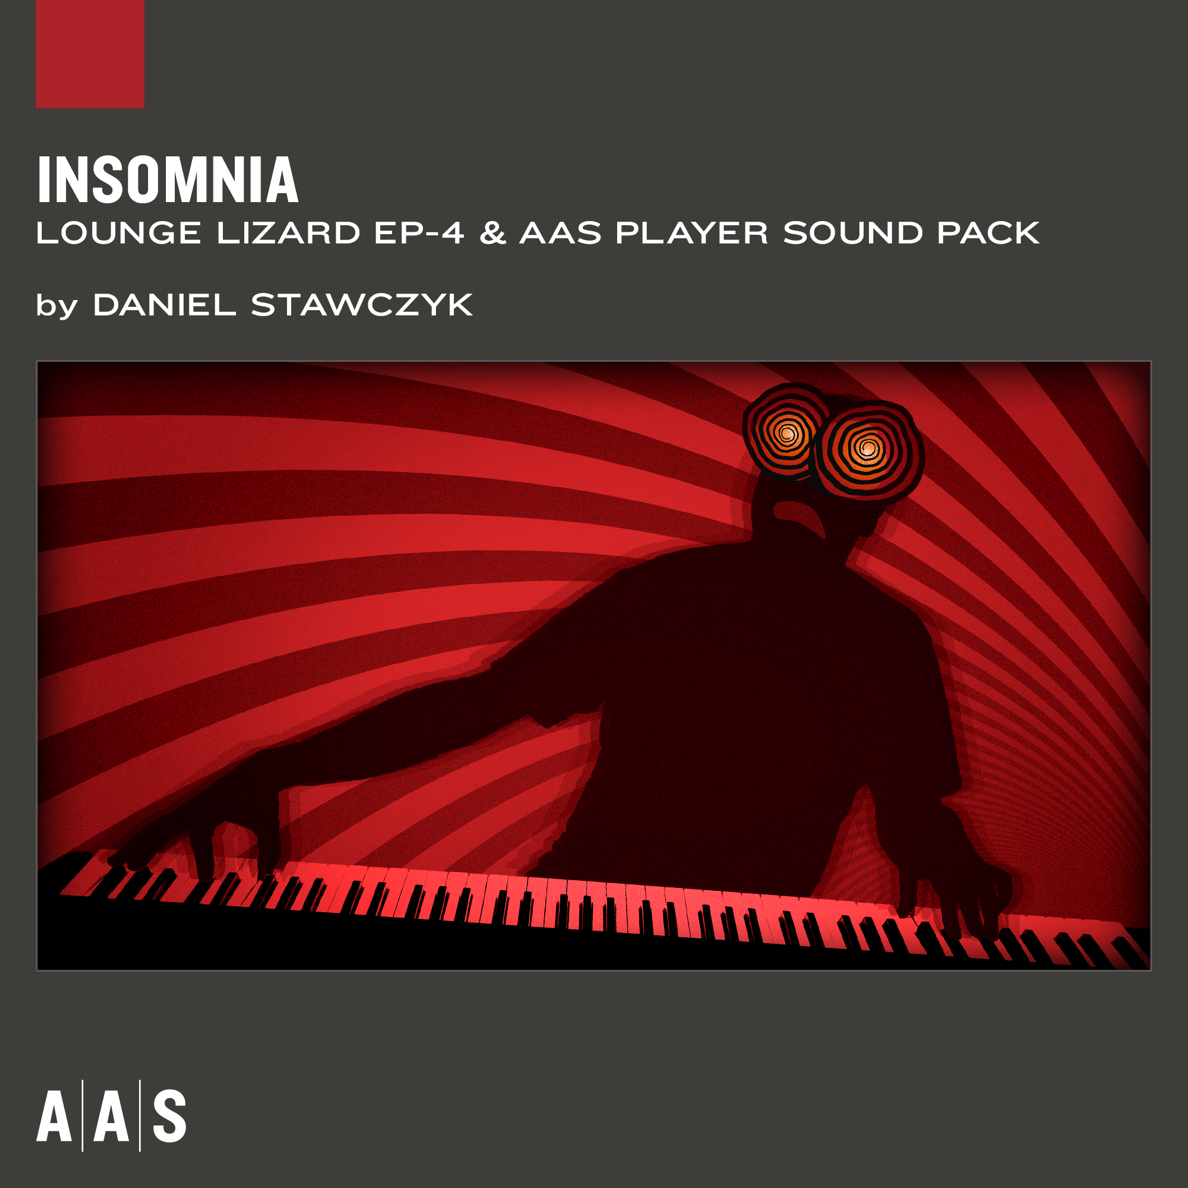 Lounge Lizard and AAS Player sound pack ： Insomnia